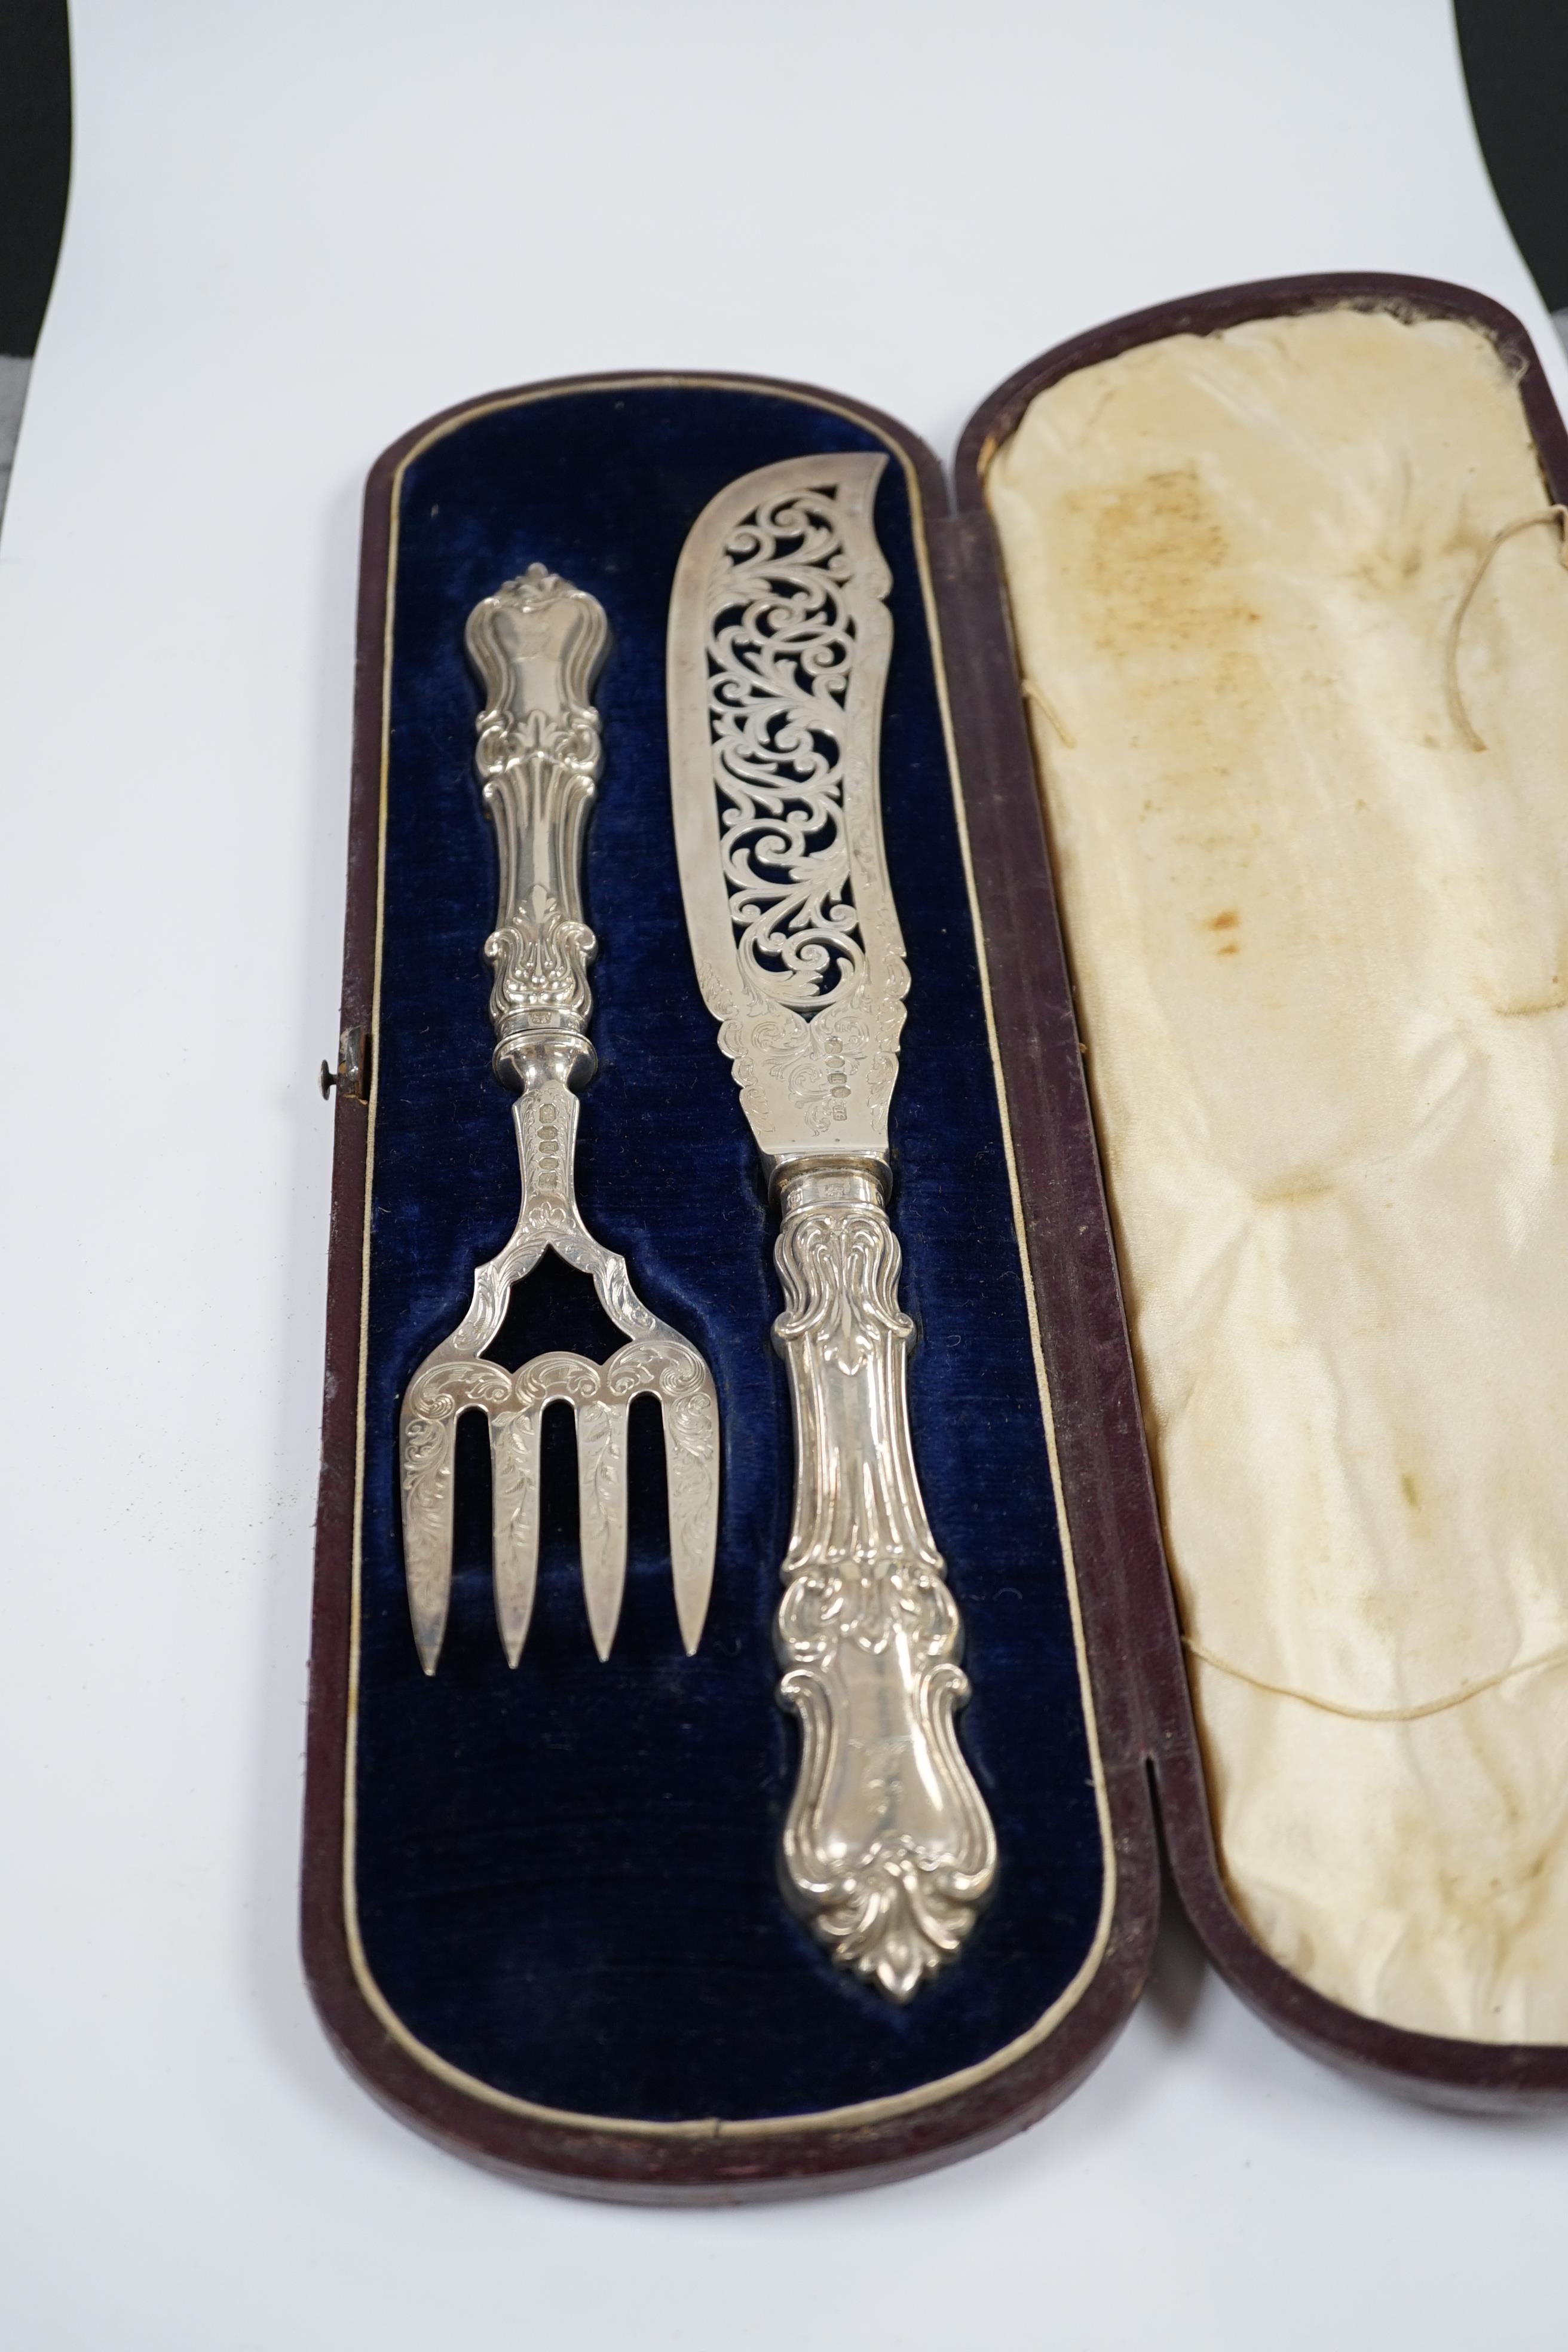 A cased pair of Victorian fish servers, by John Gamage?, Birmingham, 1850, slice 31.9cm. Condition - poor